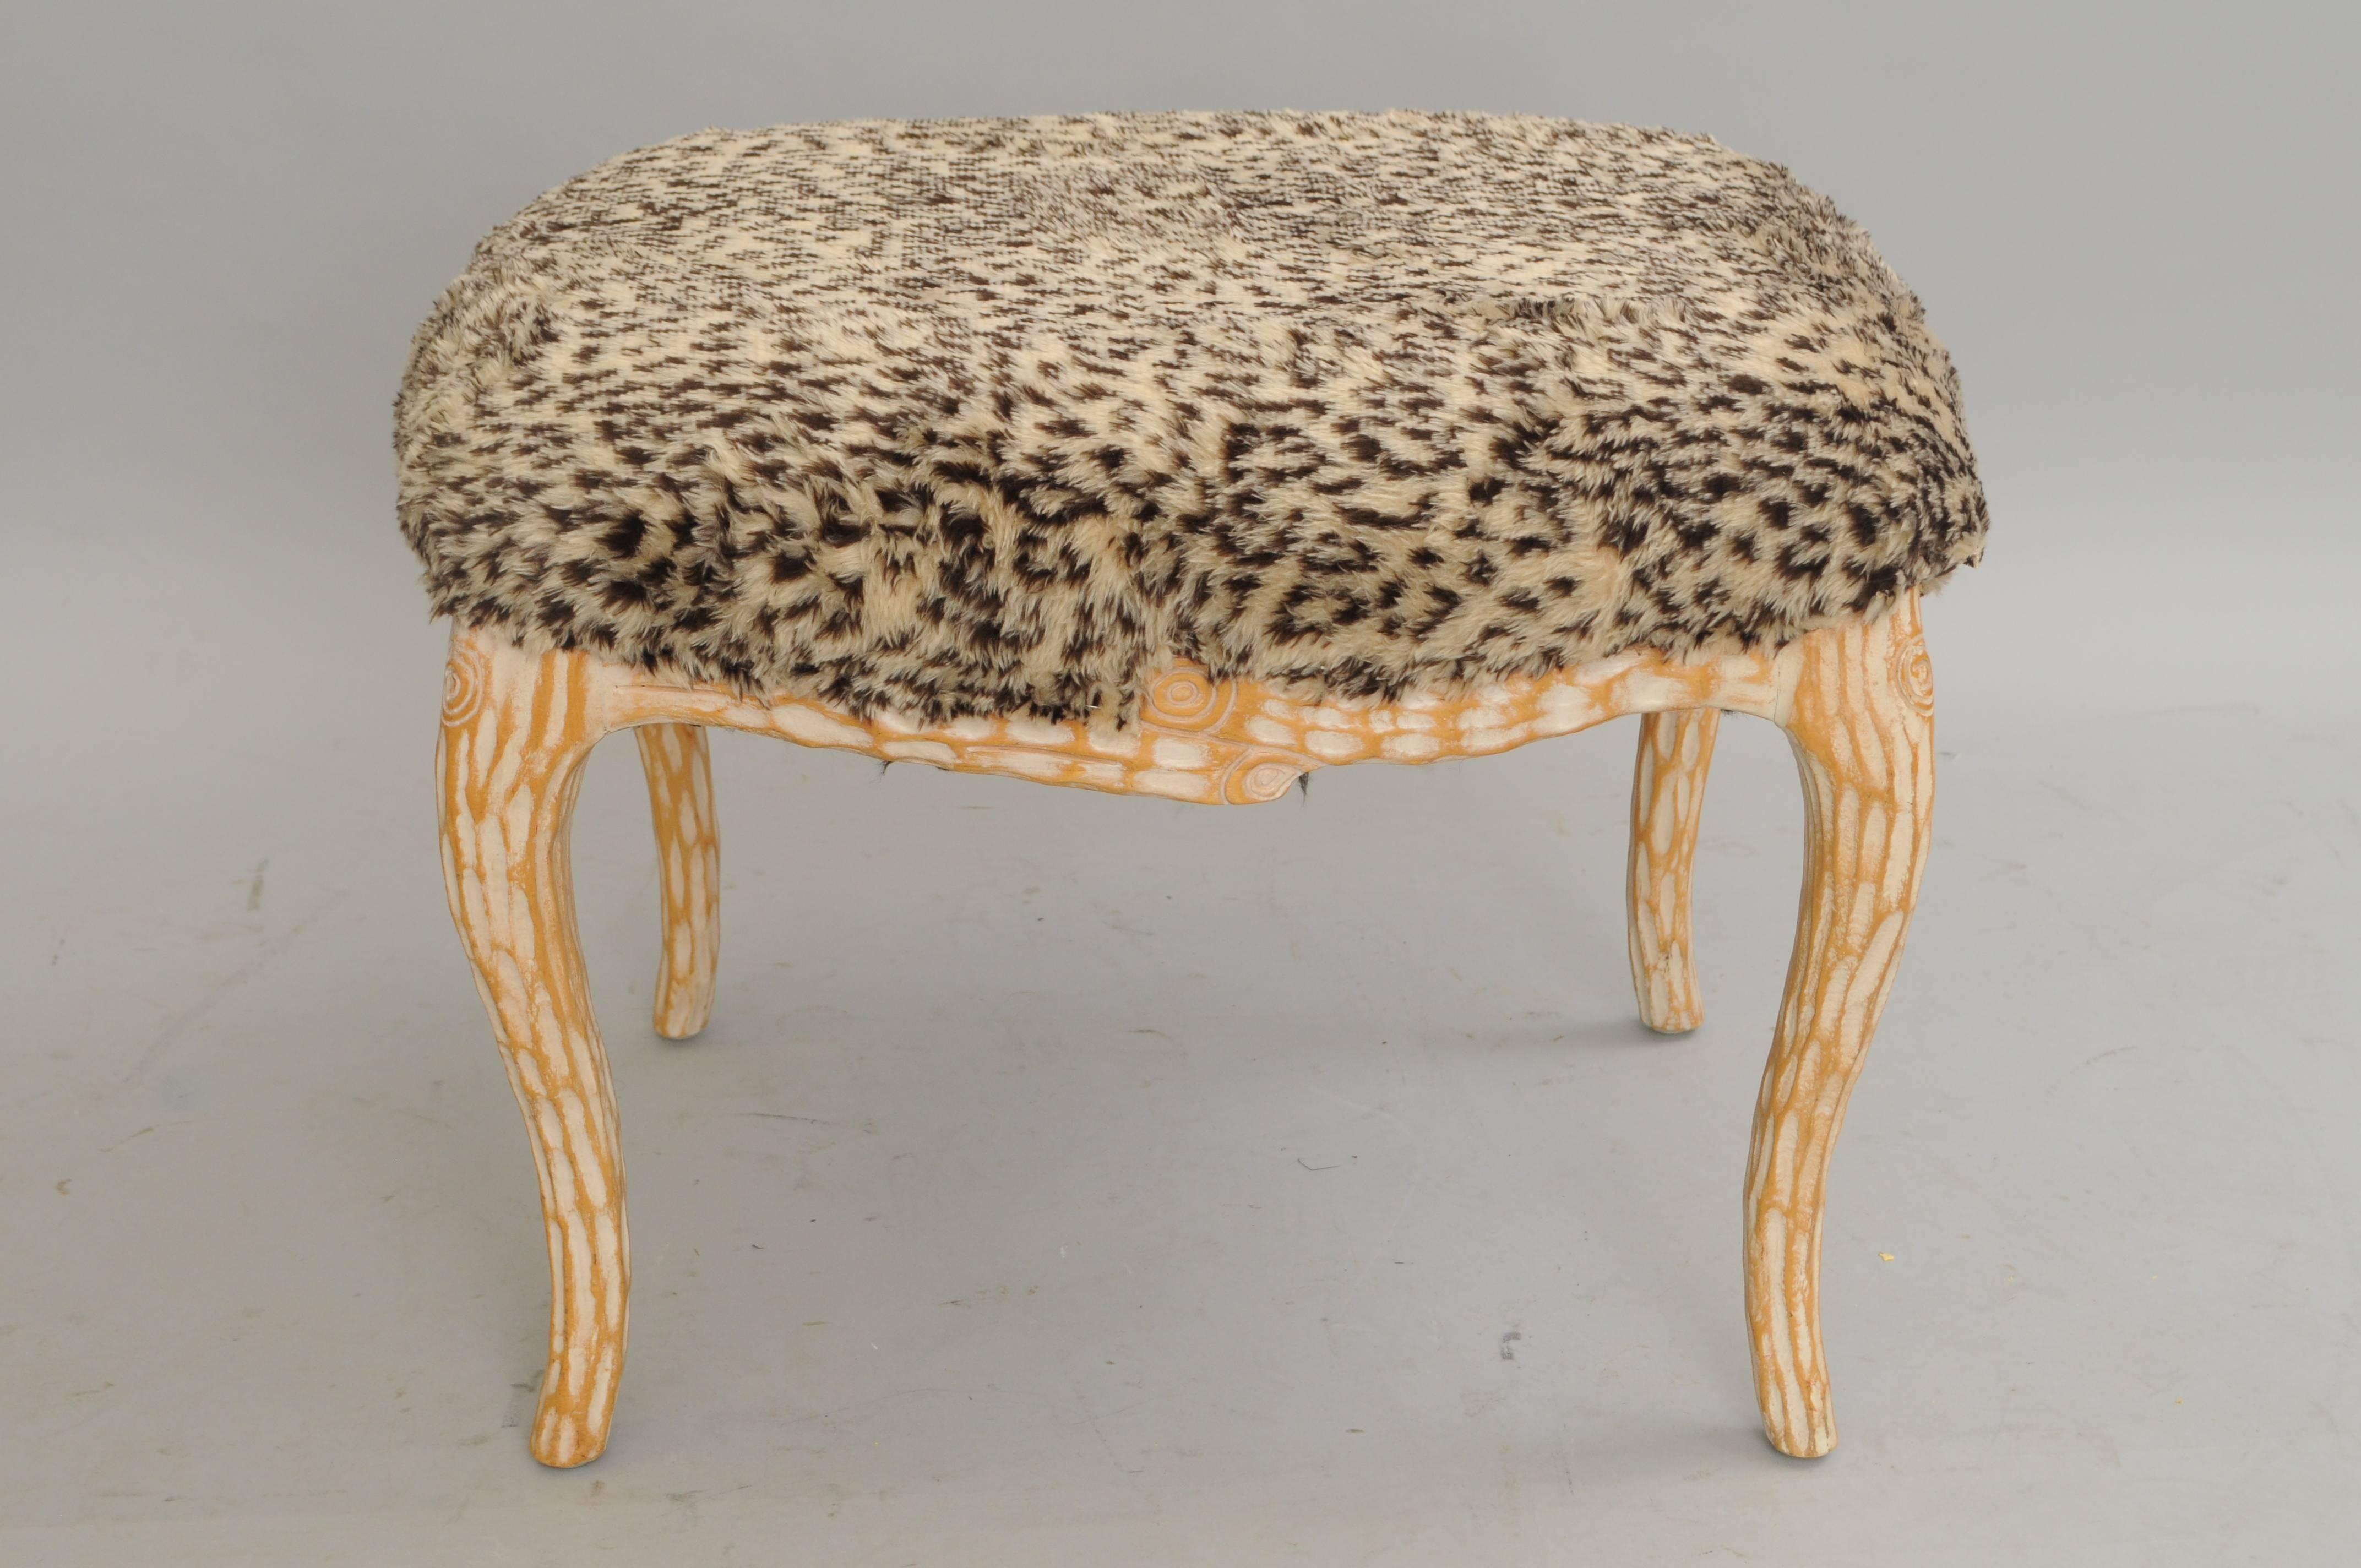 Vintage Hollywood Regency Faux Bois Carved Wood Stool with Fuzzy Leopard Seat. Item features a solid carved wood frame and fuzzy leopard print upholstery. Very unique and rare stool. Great for use in a Mid-Century Modern, Hollywood Regency,